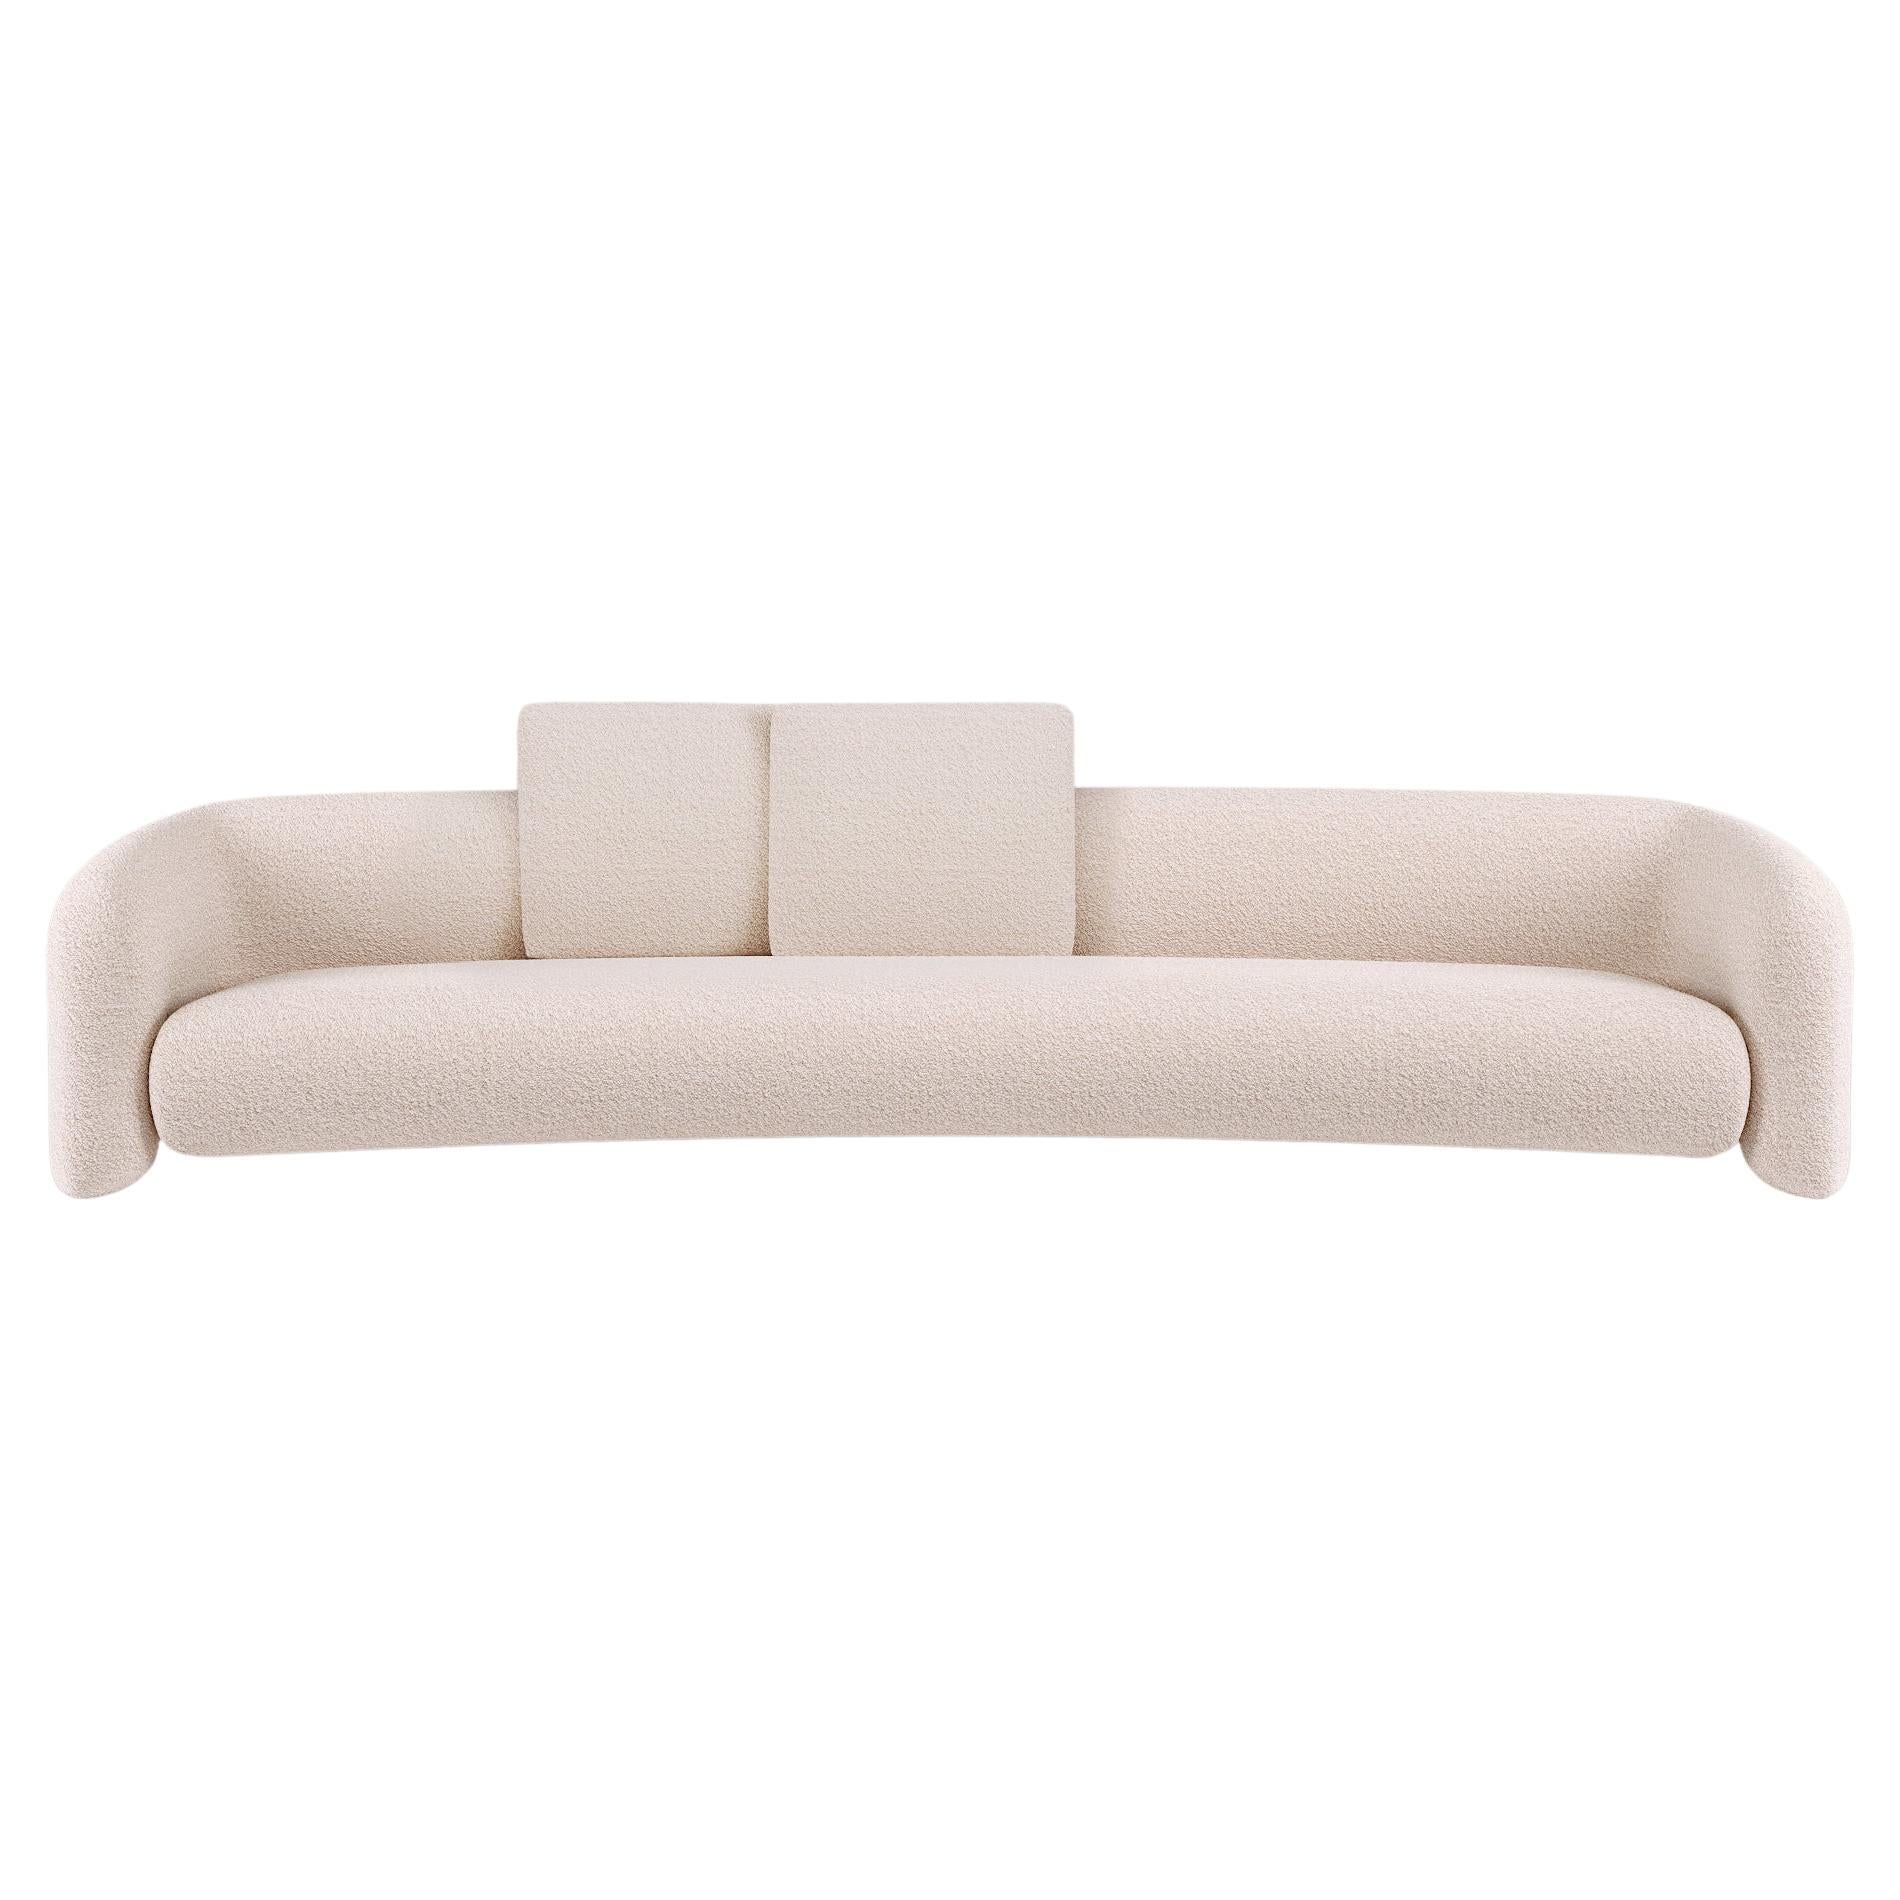 Bold Sofa Curved Open arms - M For Sale